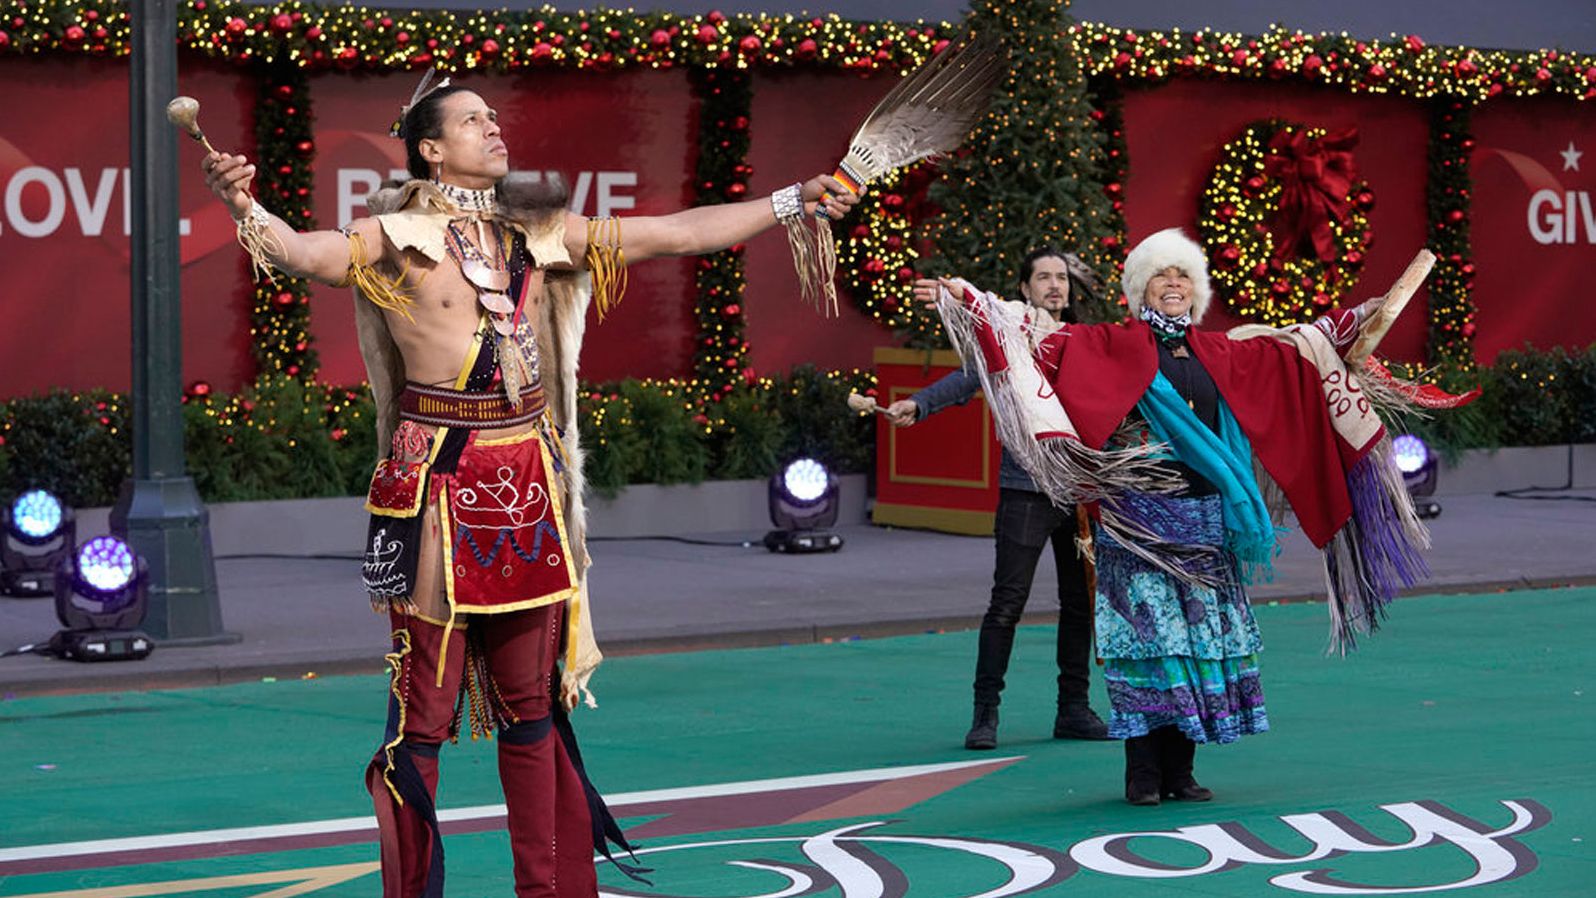 Indigenous ambassadors during the blessing and land acknowledgment at the Macy's Thanksgiving Day Parade.